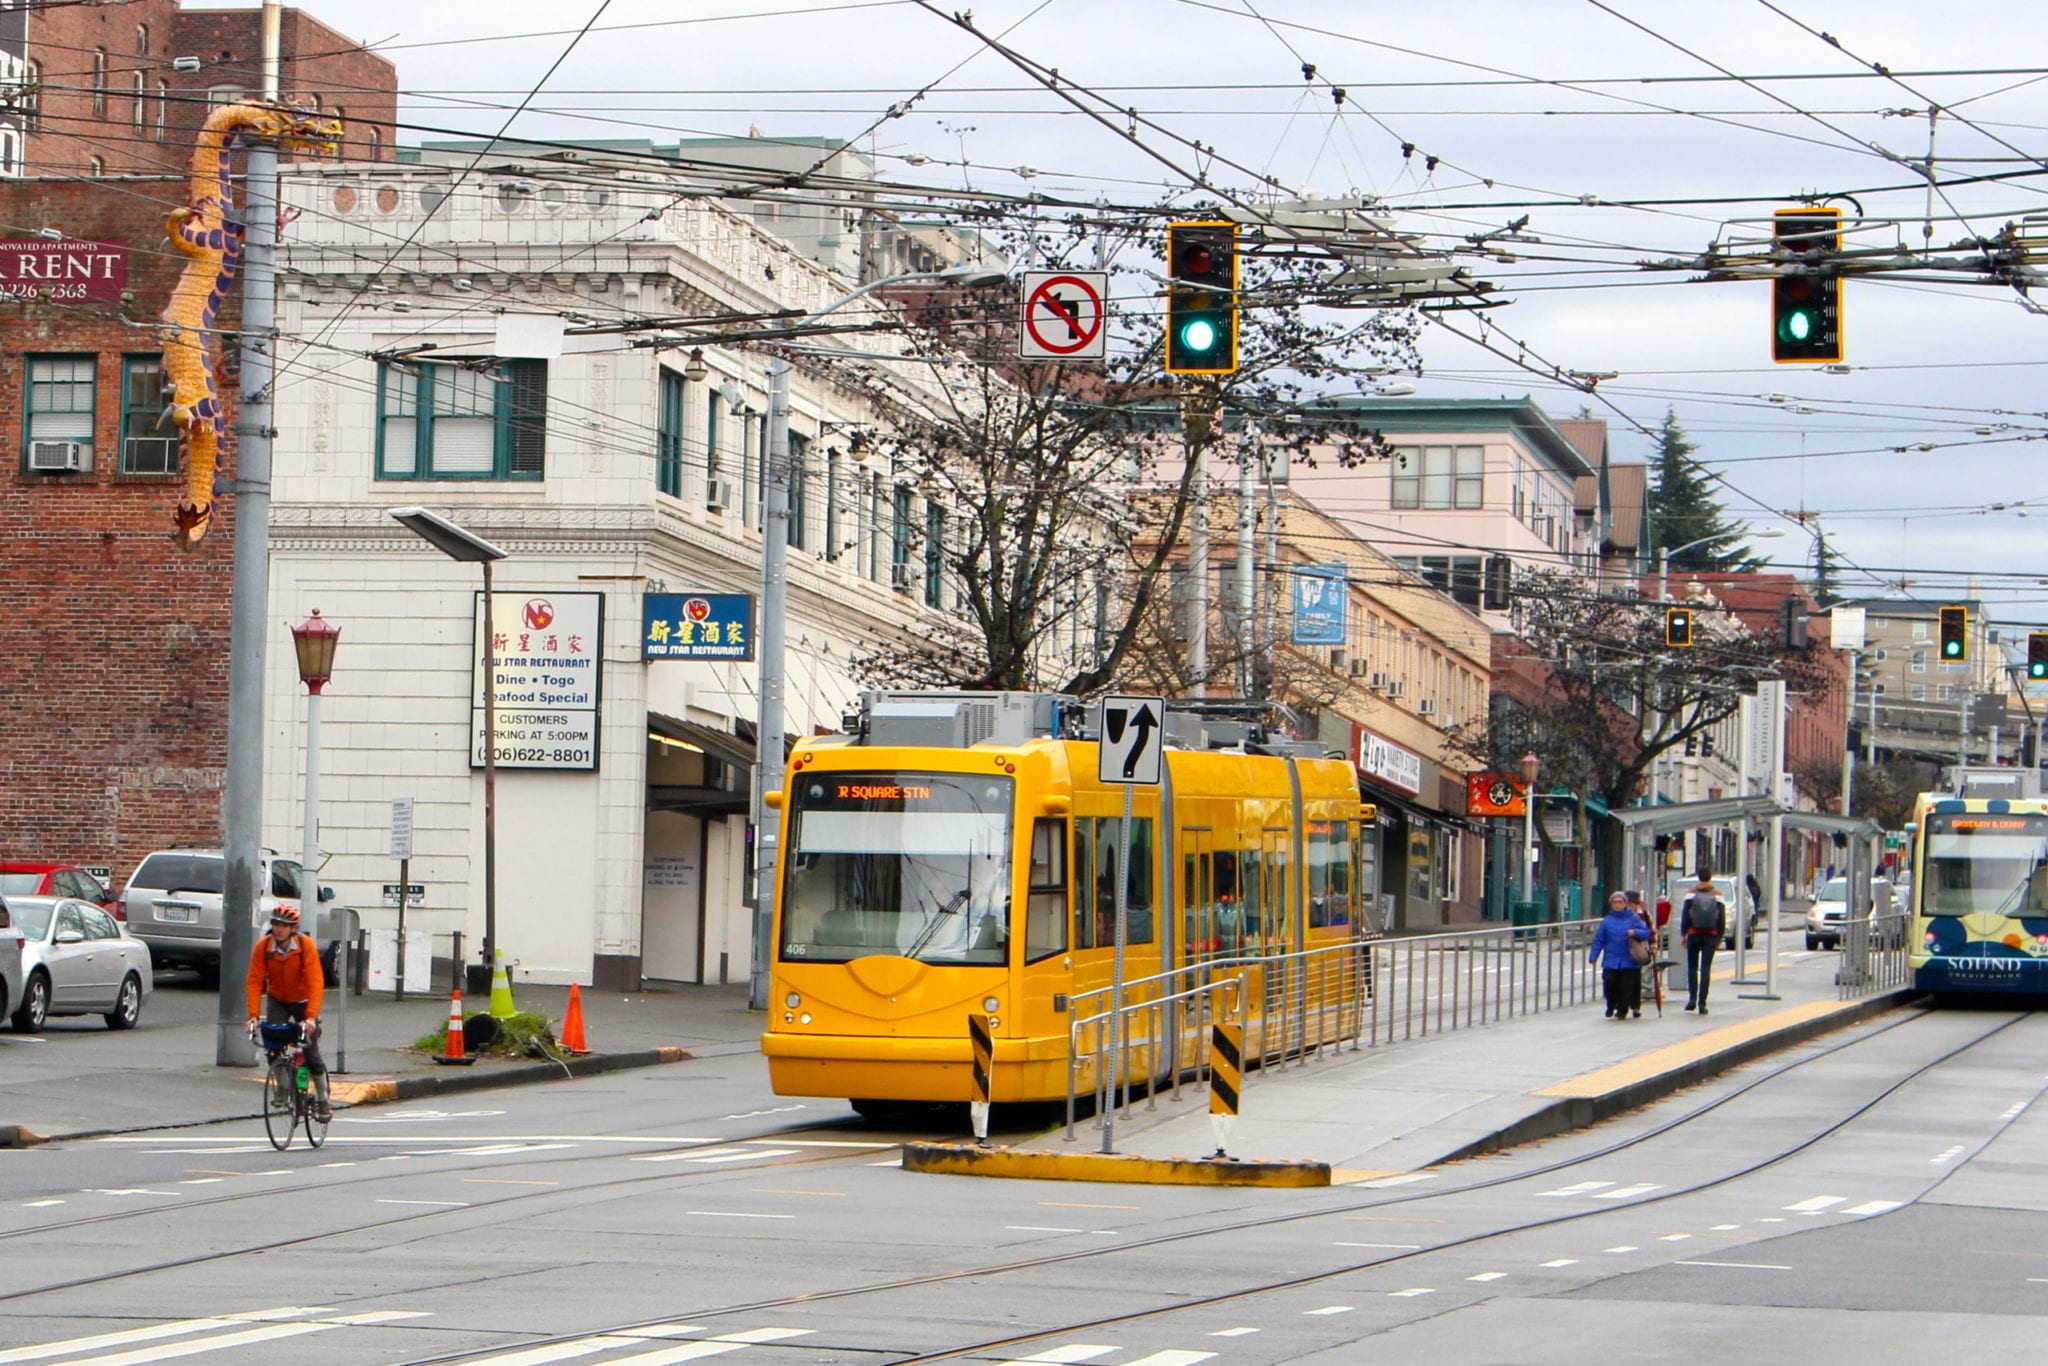 Seattle Streetcar at an intersection